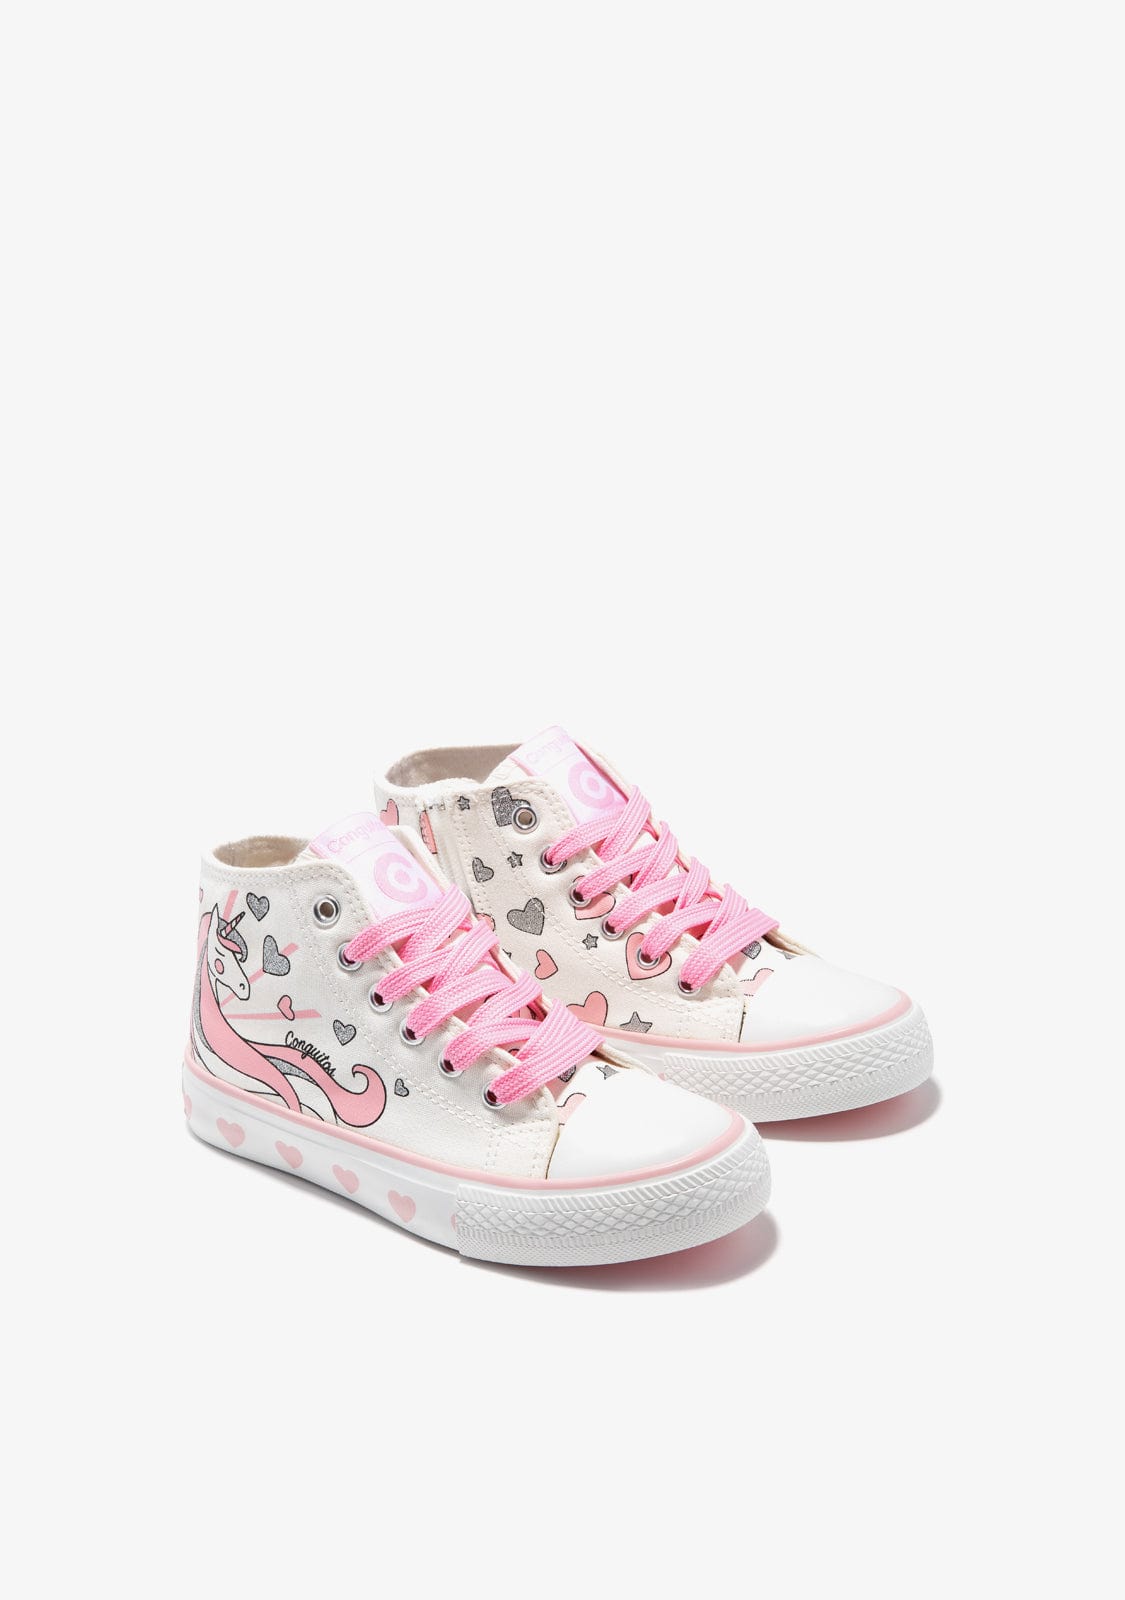 Conguitos BASKET Unicorn High Top Sneakers White